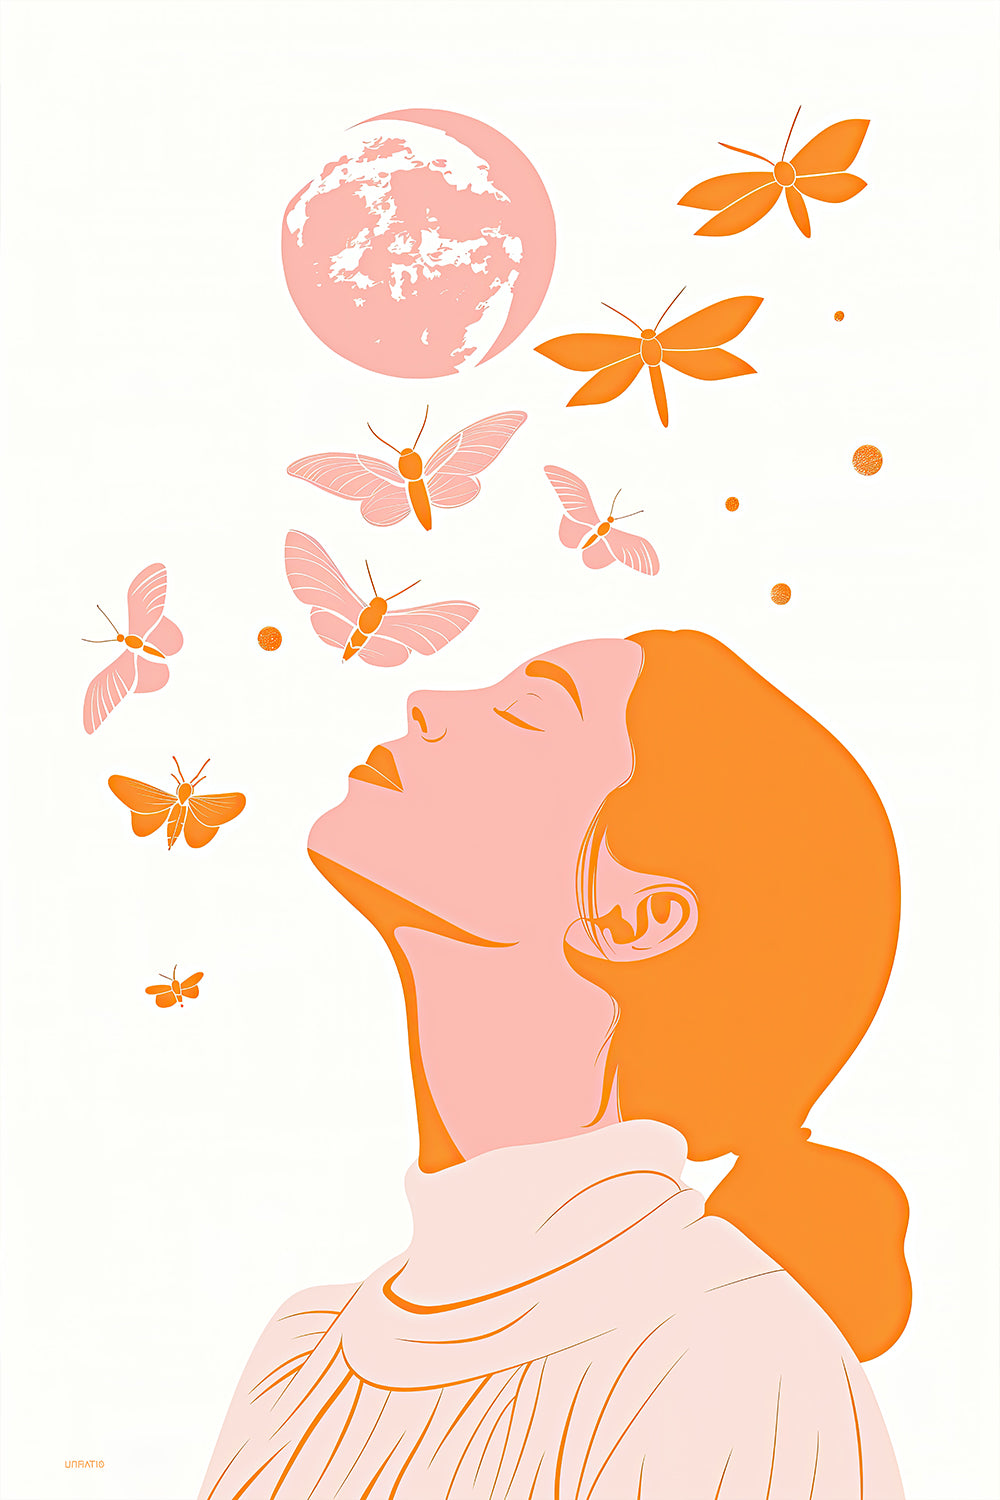 Artistic illustration of a woman with her eyes closed, basking under a pink moon with moths and flowers, evoking a peaceful and creative night-time vibe.